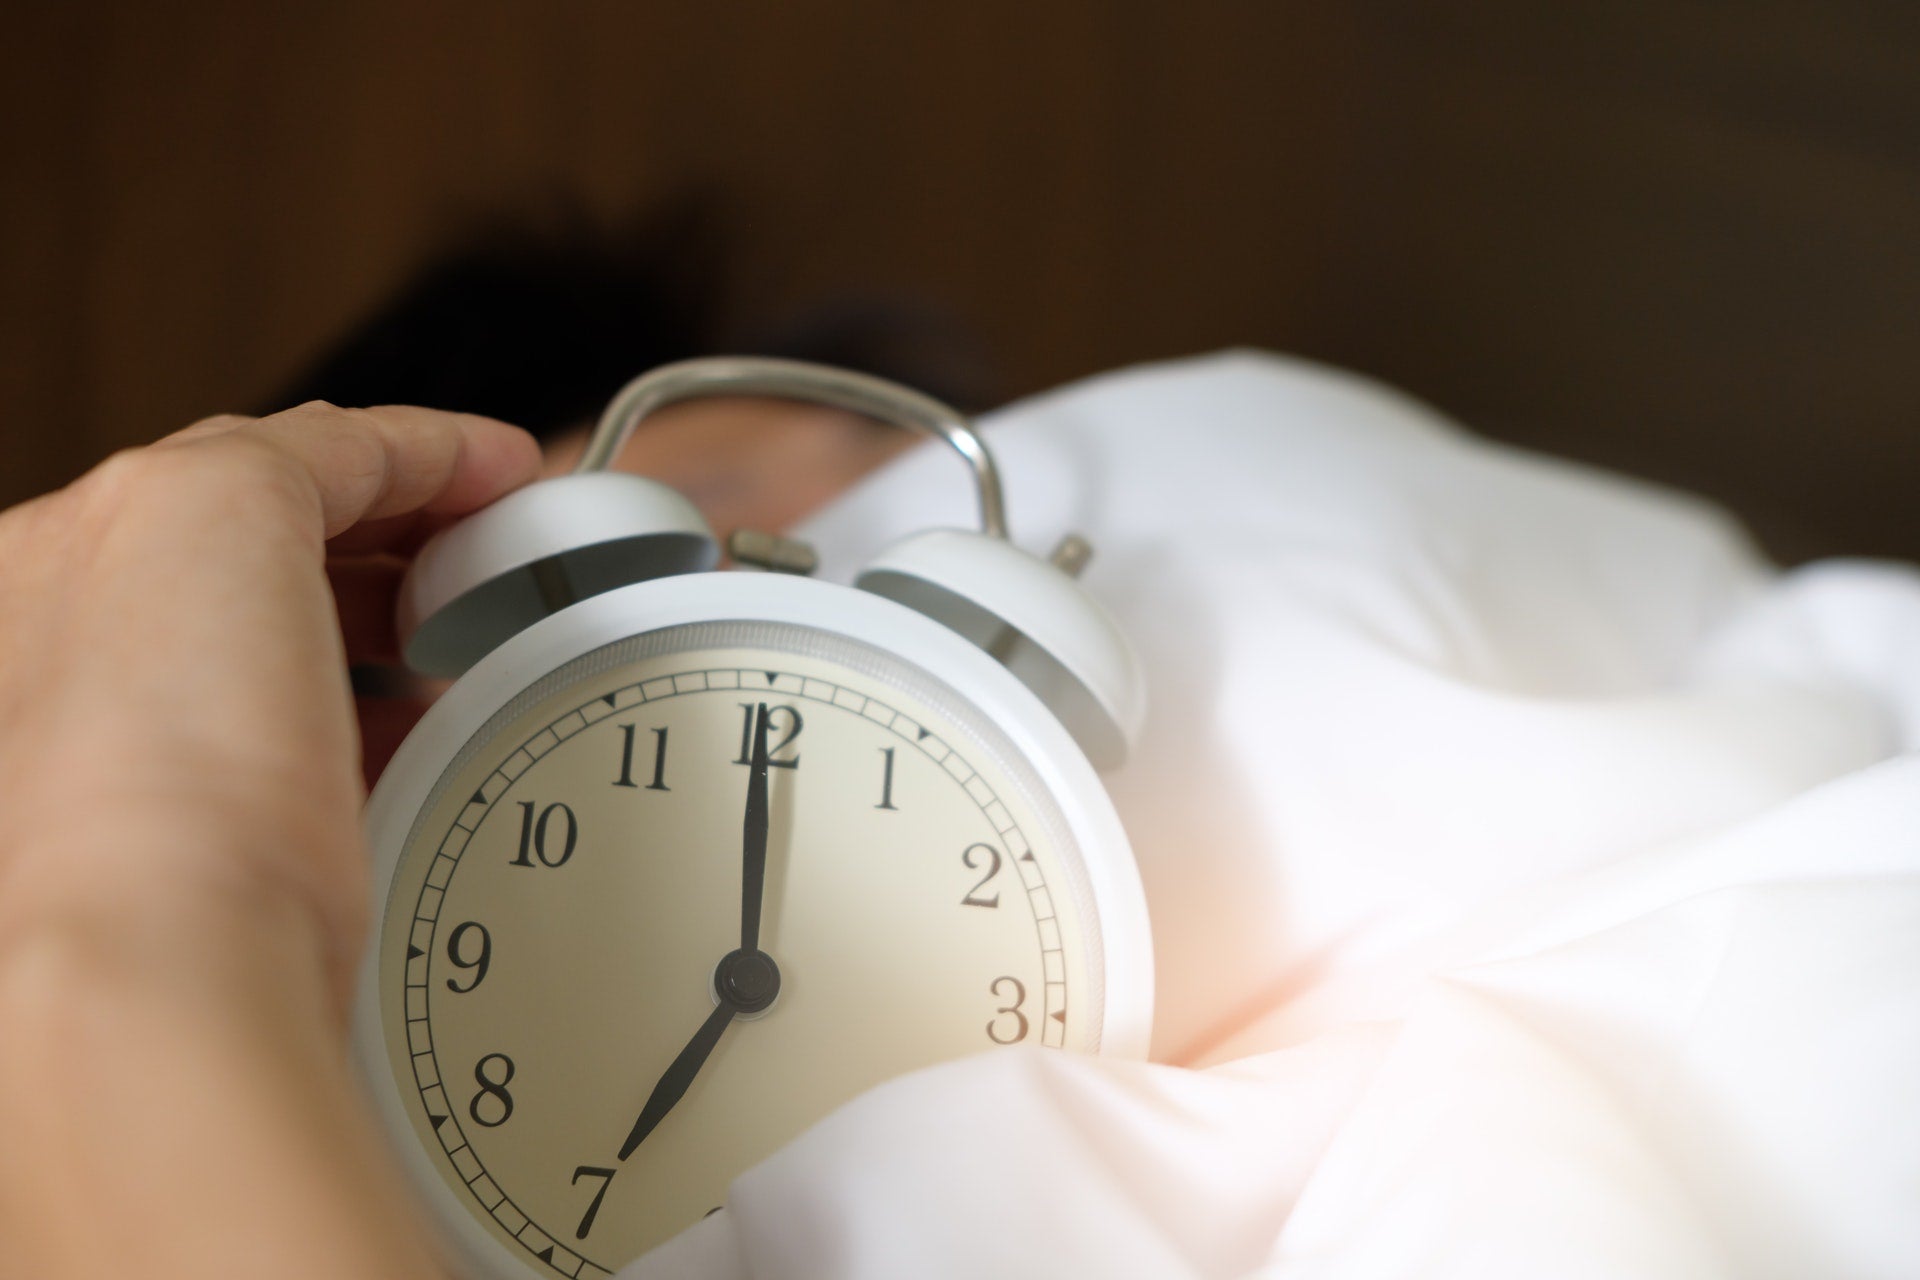 A white alarm clock indicating it’s 7 o’clock, underneath a person’s fingers, tucked into white bed sheets